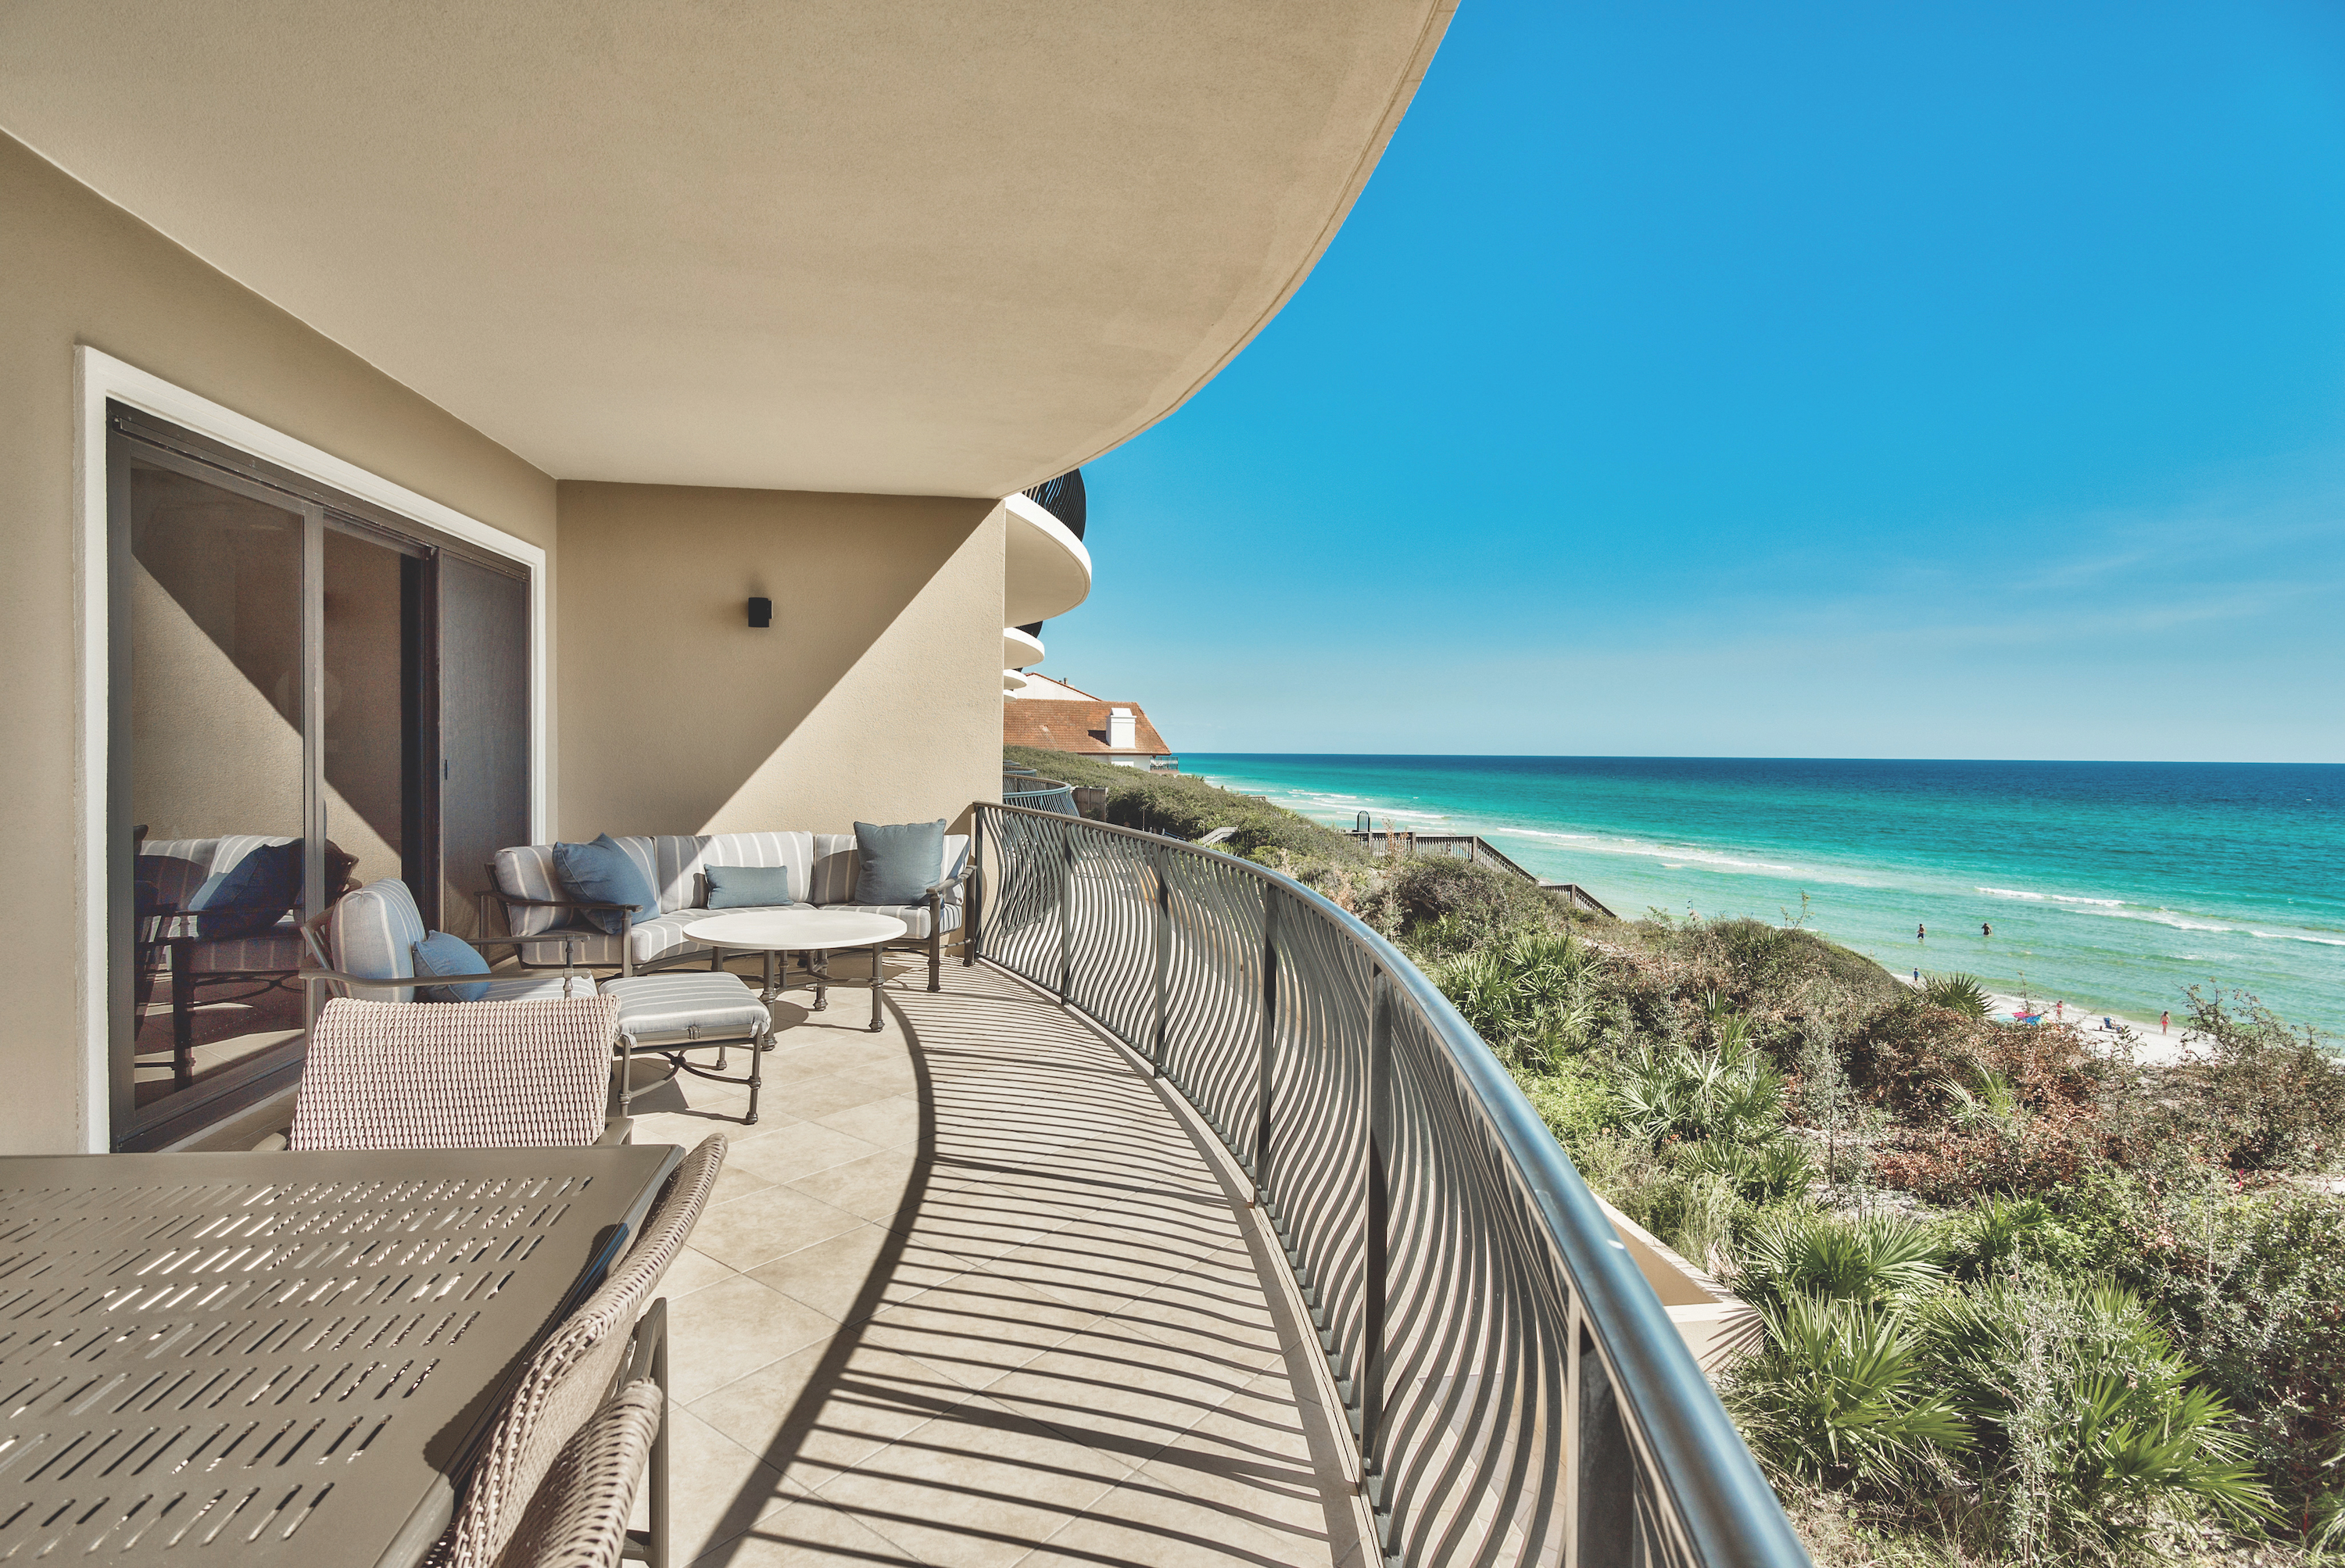 Beautiful gulf view from a balcony of an Andante condo